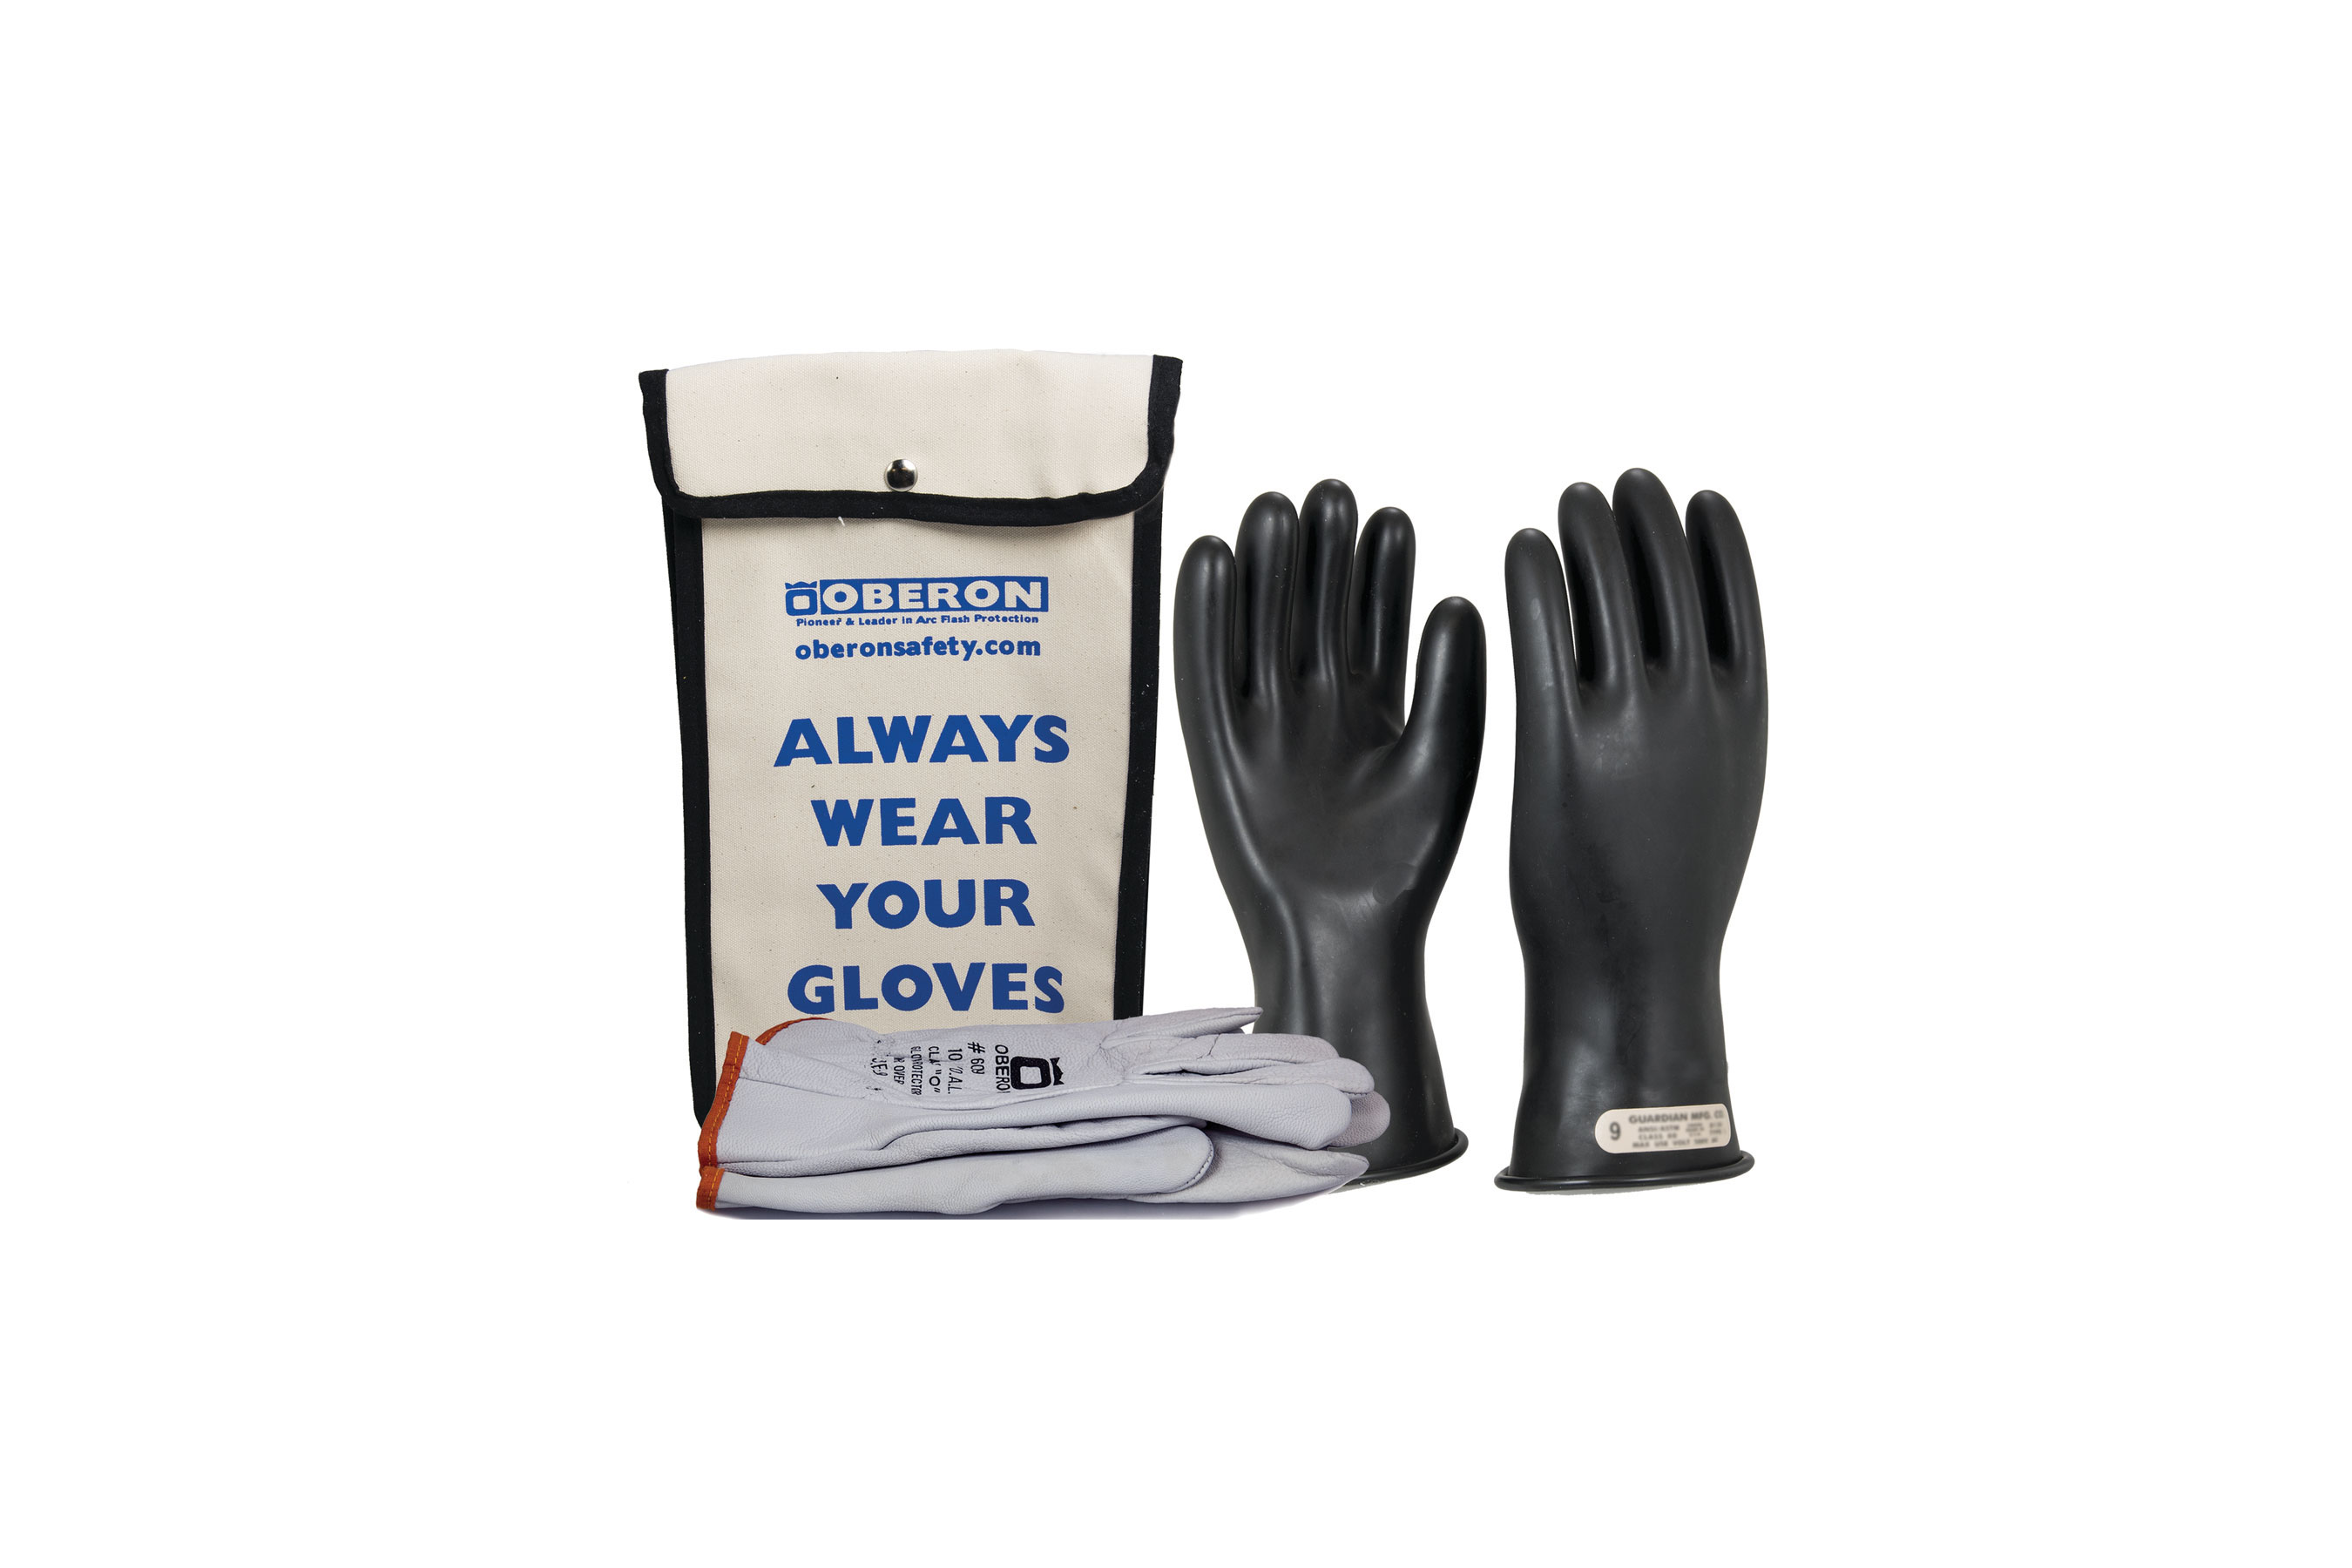 Oberon Co.'s rubber electrical glove kit